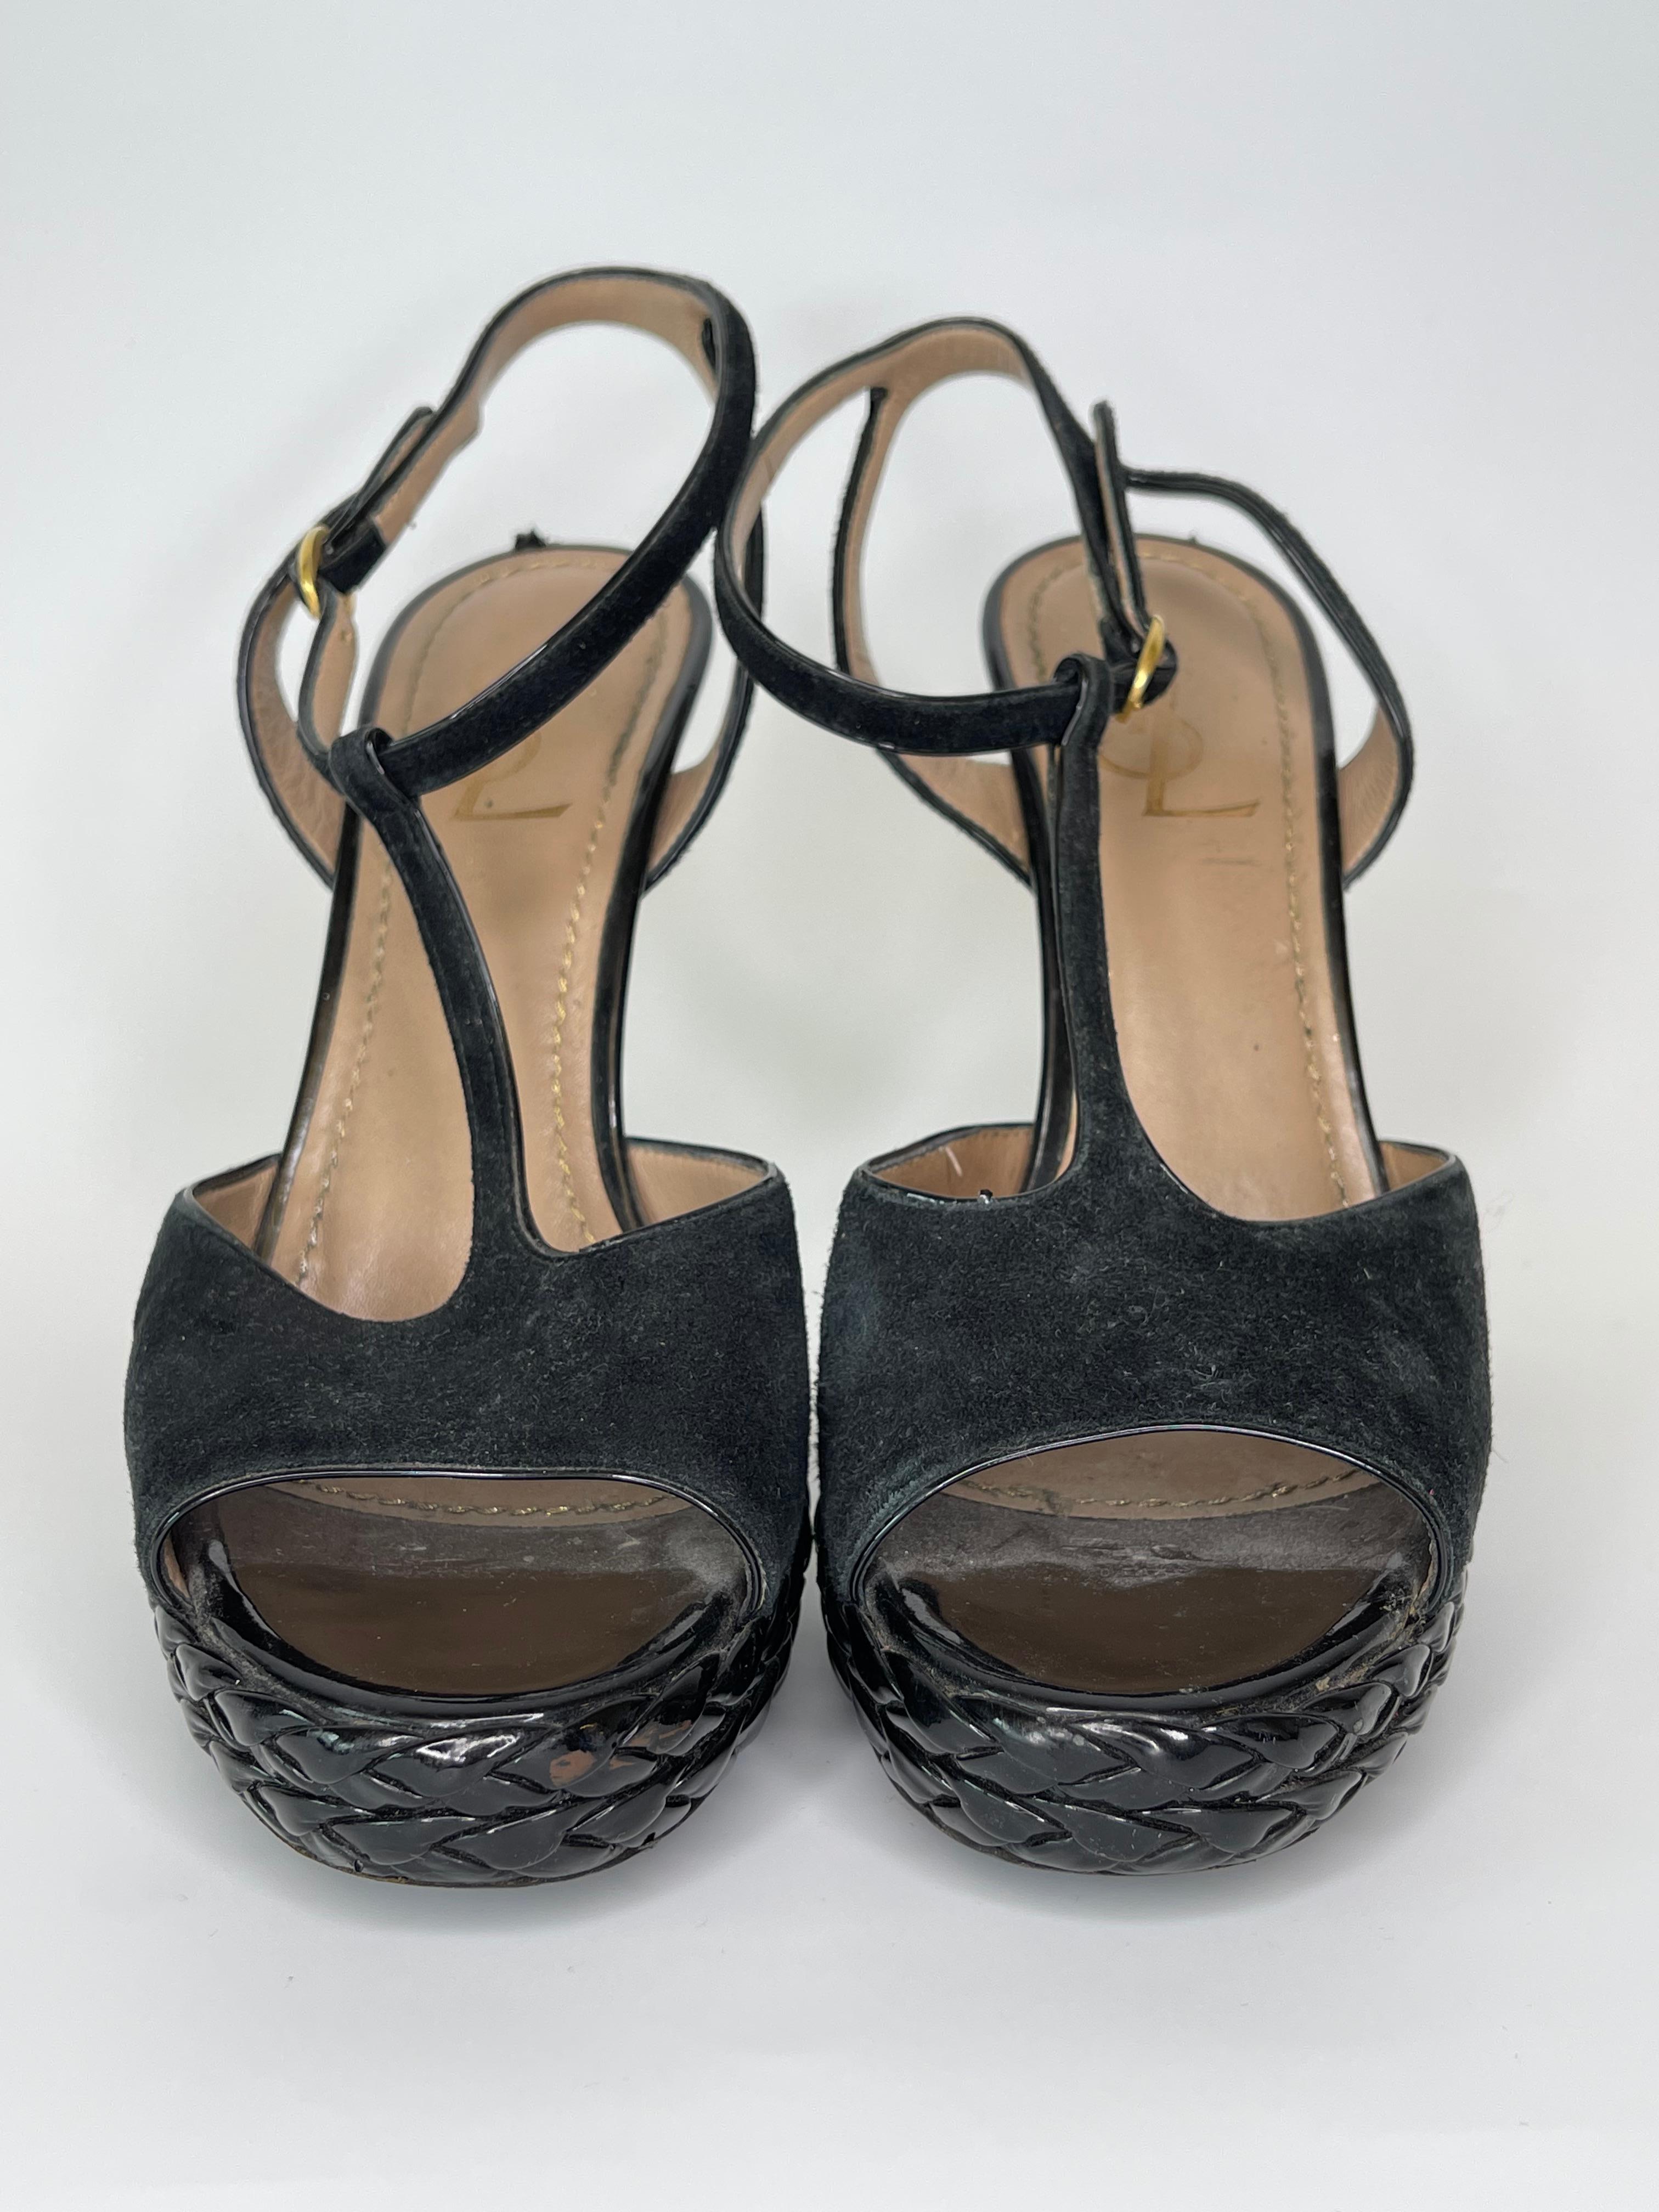 These YSL t-strap suede open toe stilettos are a beautiful black colour, with a basketweave design near the toe. Gold stitching throughout the interior. Buckle at the heel to hold in place.

COLOR: Black 
MATERIAL: Suede, leather insole with leather